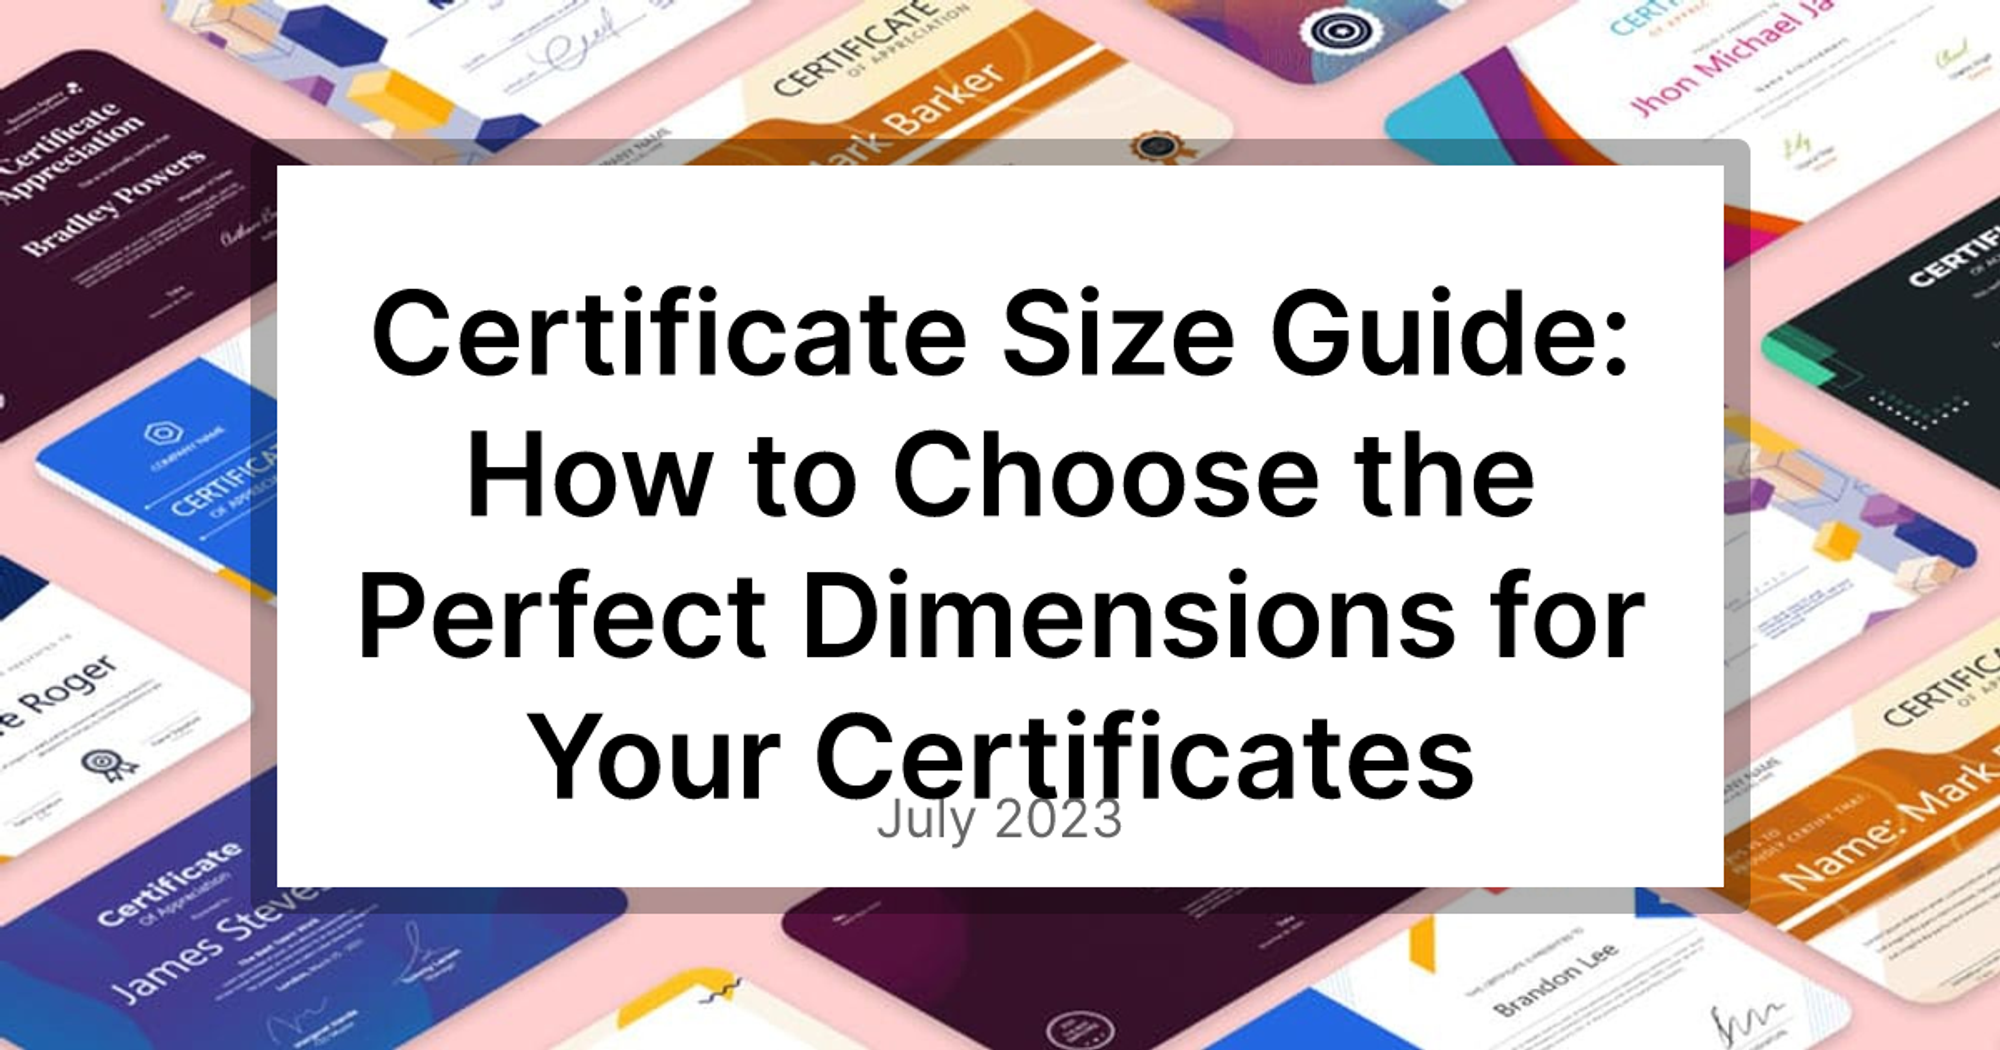 Certificate Size Guide: How to Choose the Perfect Dimensions for Your Certificates